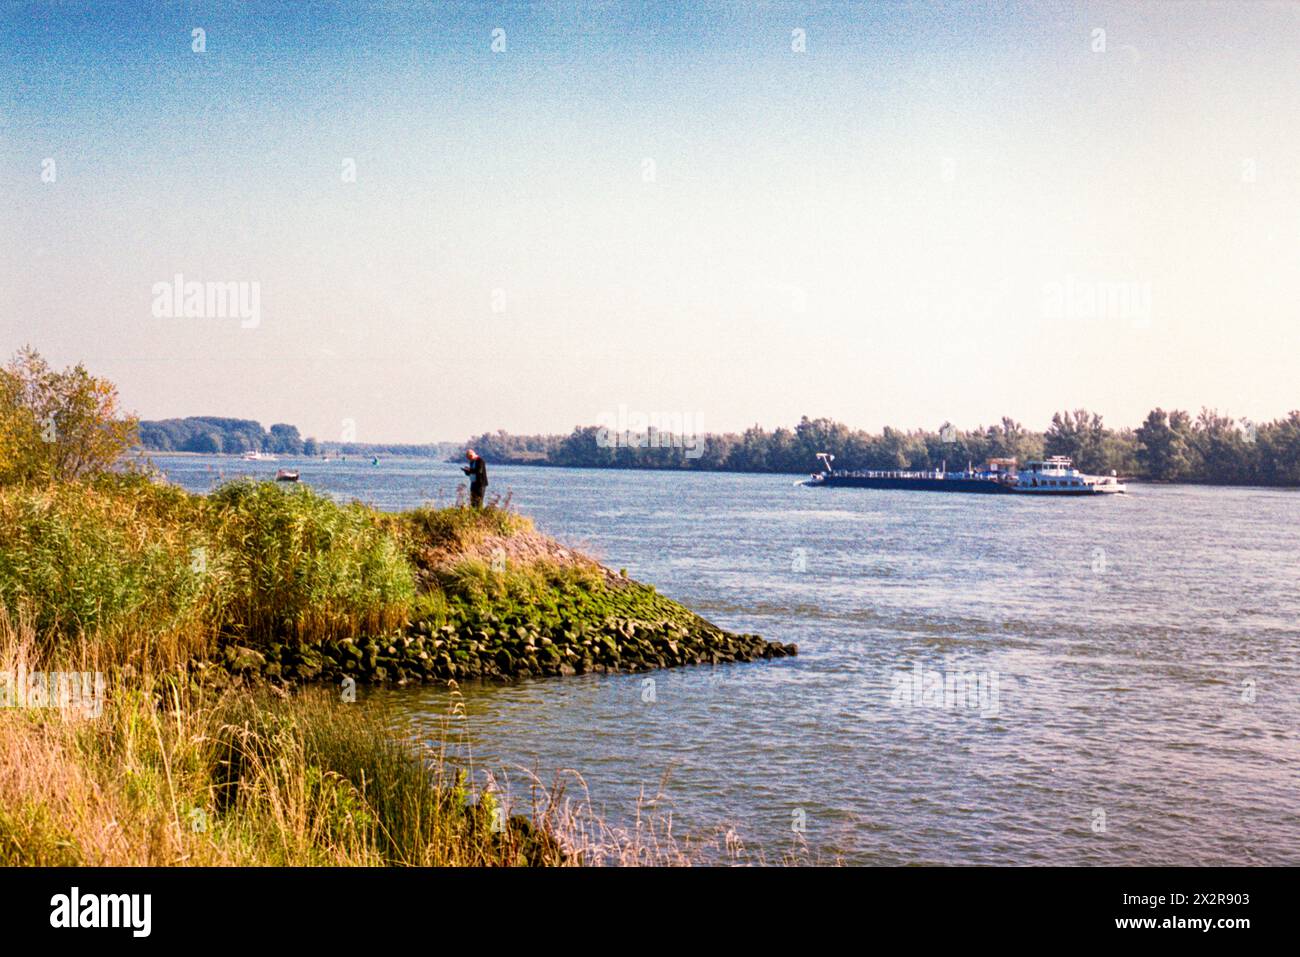 Oude Maas River / Old Maas River View on Oude Maas River / Old Maas River from Poortugaal s River Dike near Delta Psychiatric Hospital. Poortugaal, Netherlands. Poortugaal Oude Maas Zuid-Holland Nederland Copyright: xGuidoxKoppesxPhotox Stock Photo